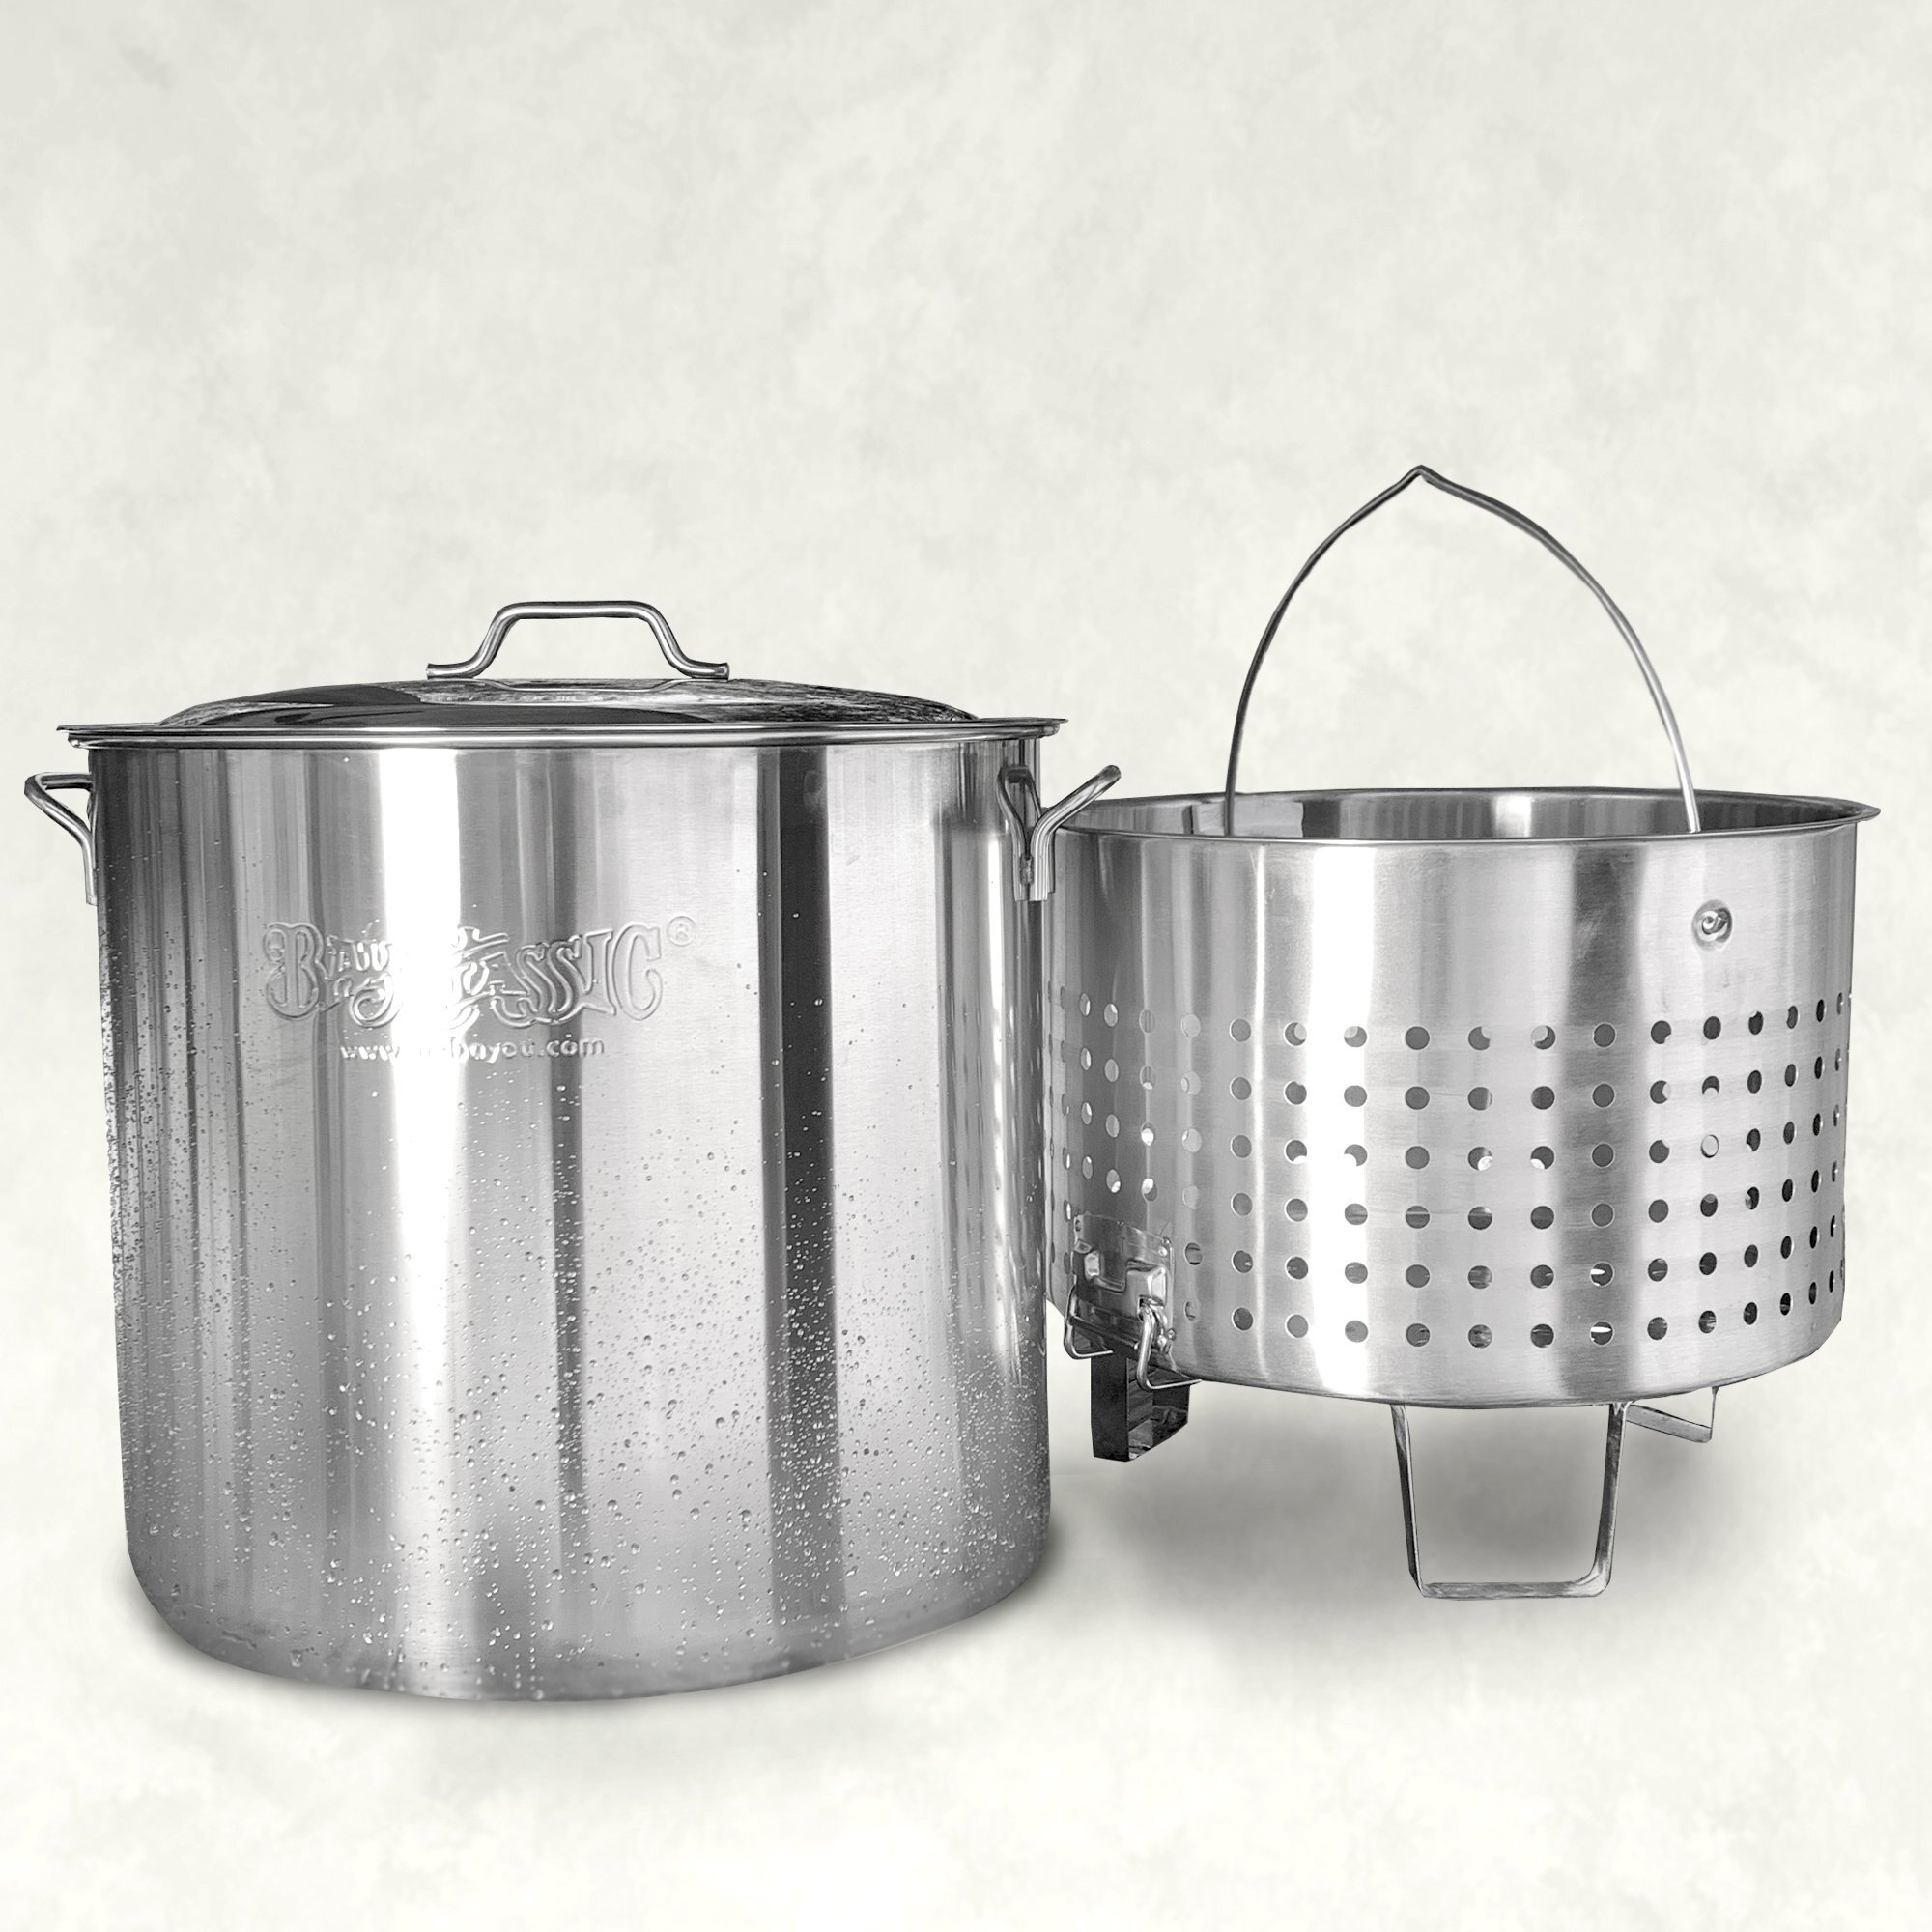 Ridged Stainless Steel Boiling Pot with Basket and Lid - Assorted